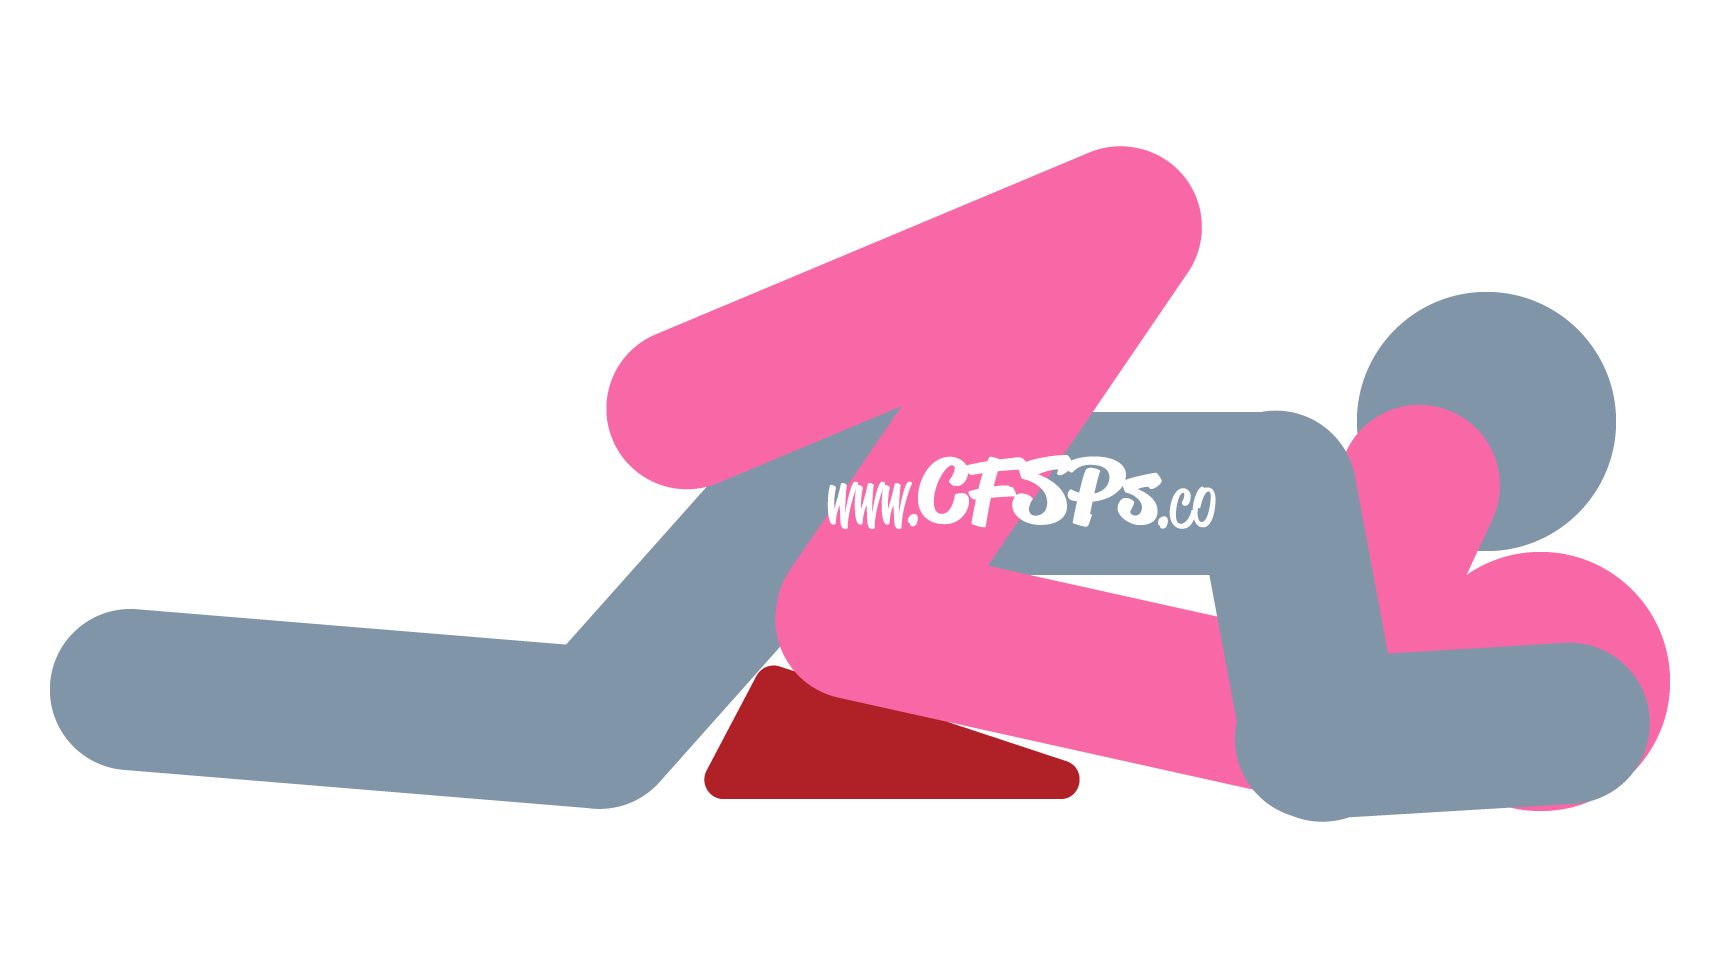 An illustration of the Adapted Missionary sex position. This picture demonstrates how Adapted Missionary is a man-on-top sex position with deep penetration that's ideal for plus-size couples.